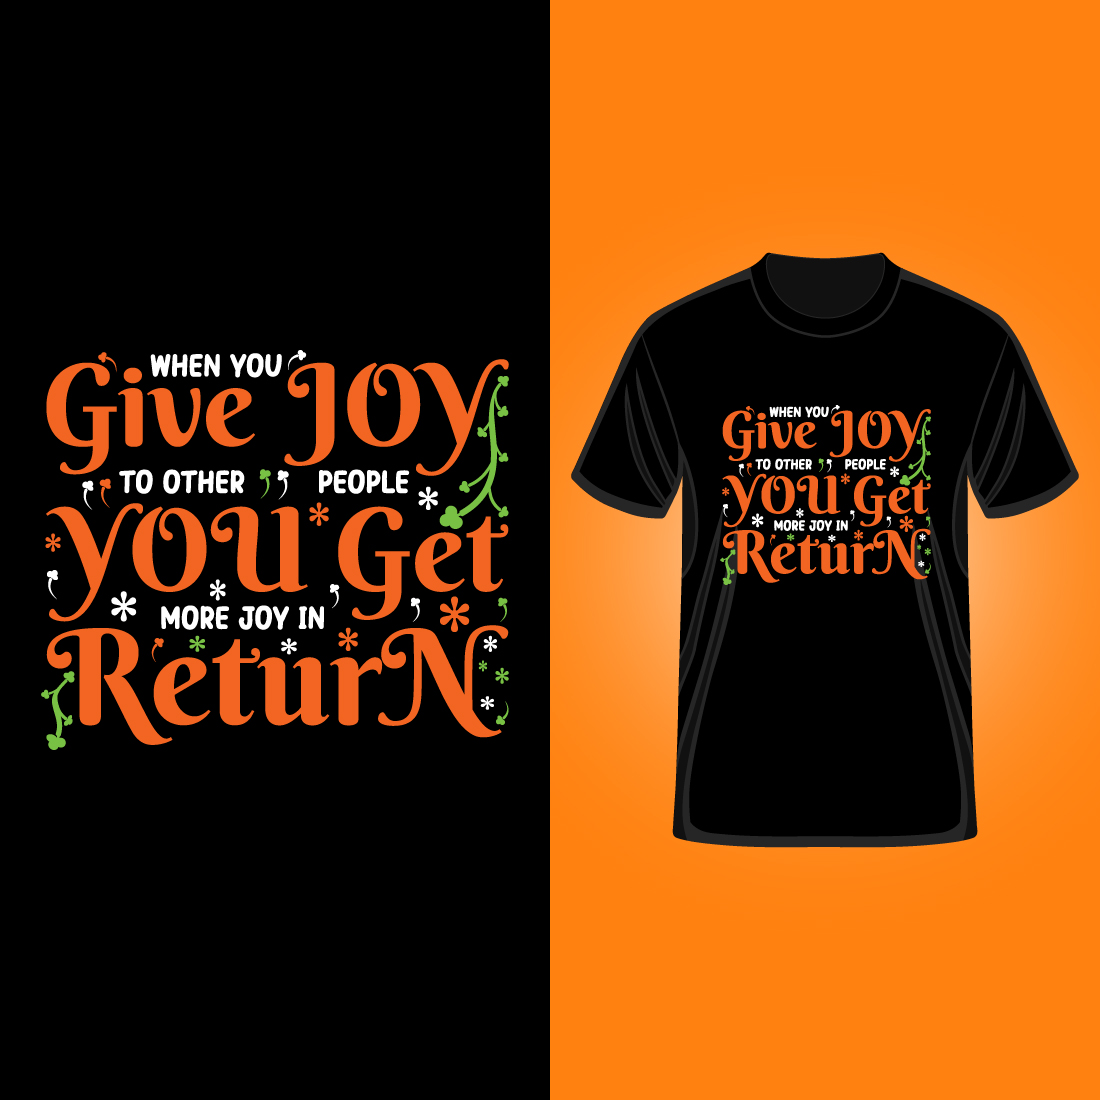 Motivational typography vector t-shirt design cover image.